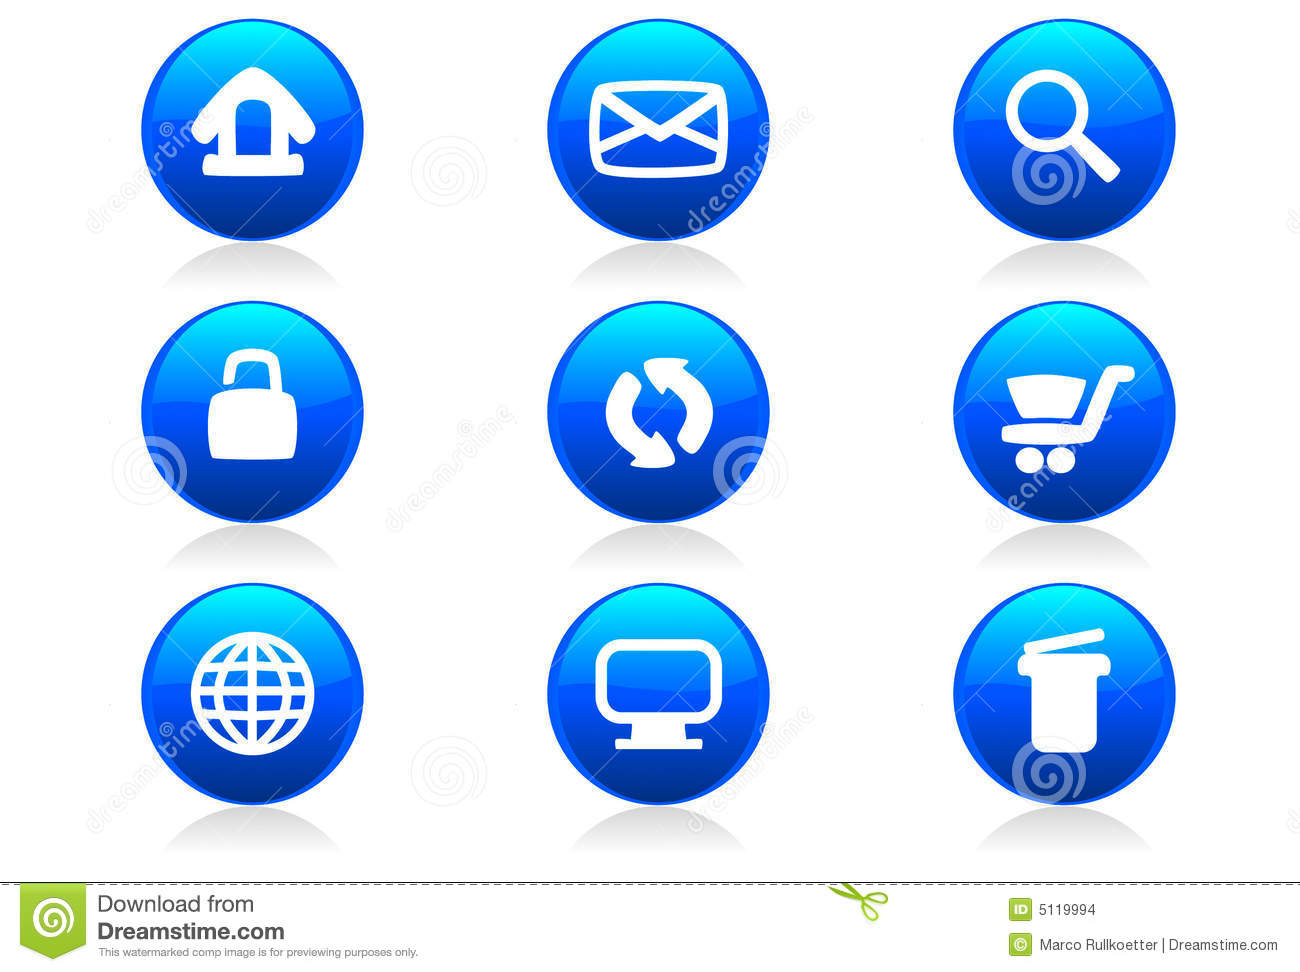 Web Buttons and Icons